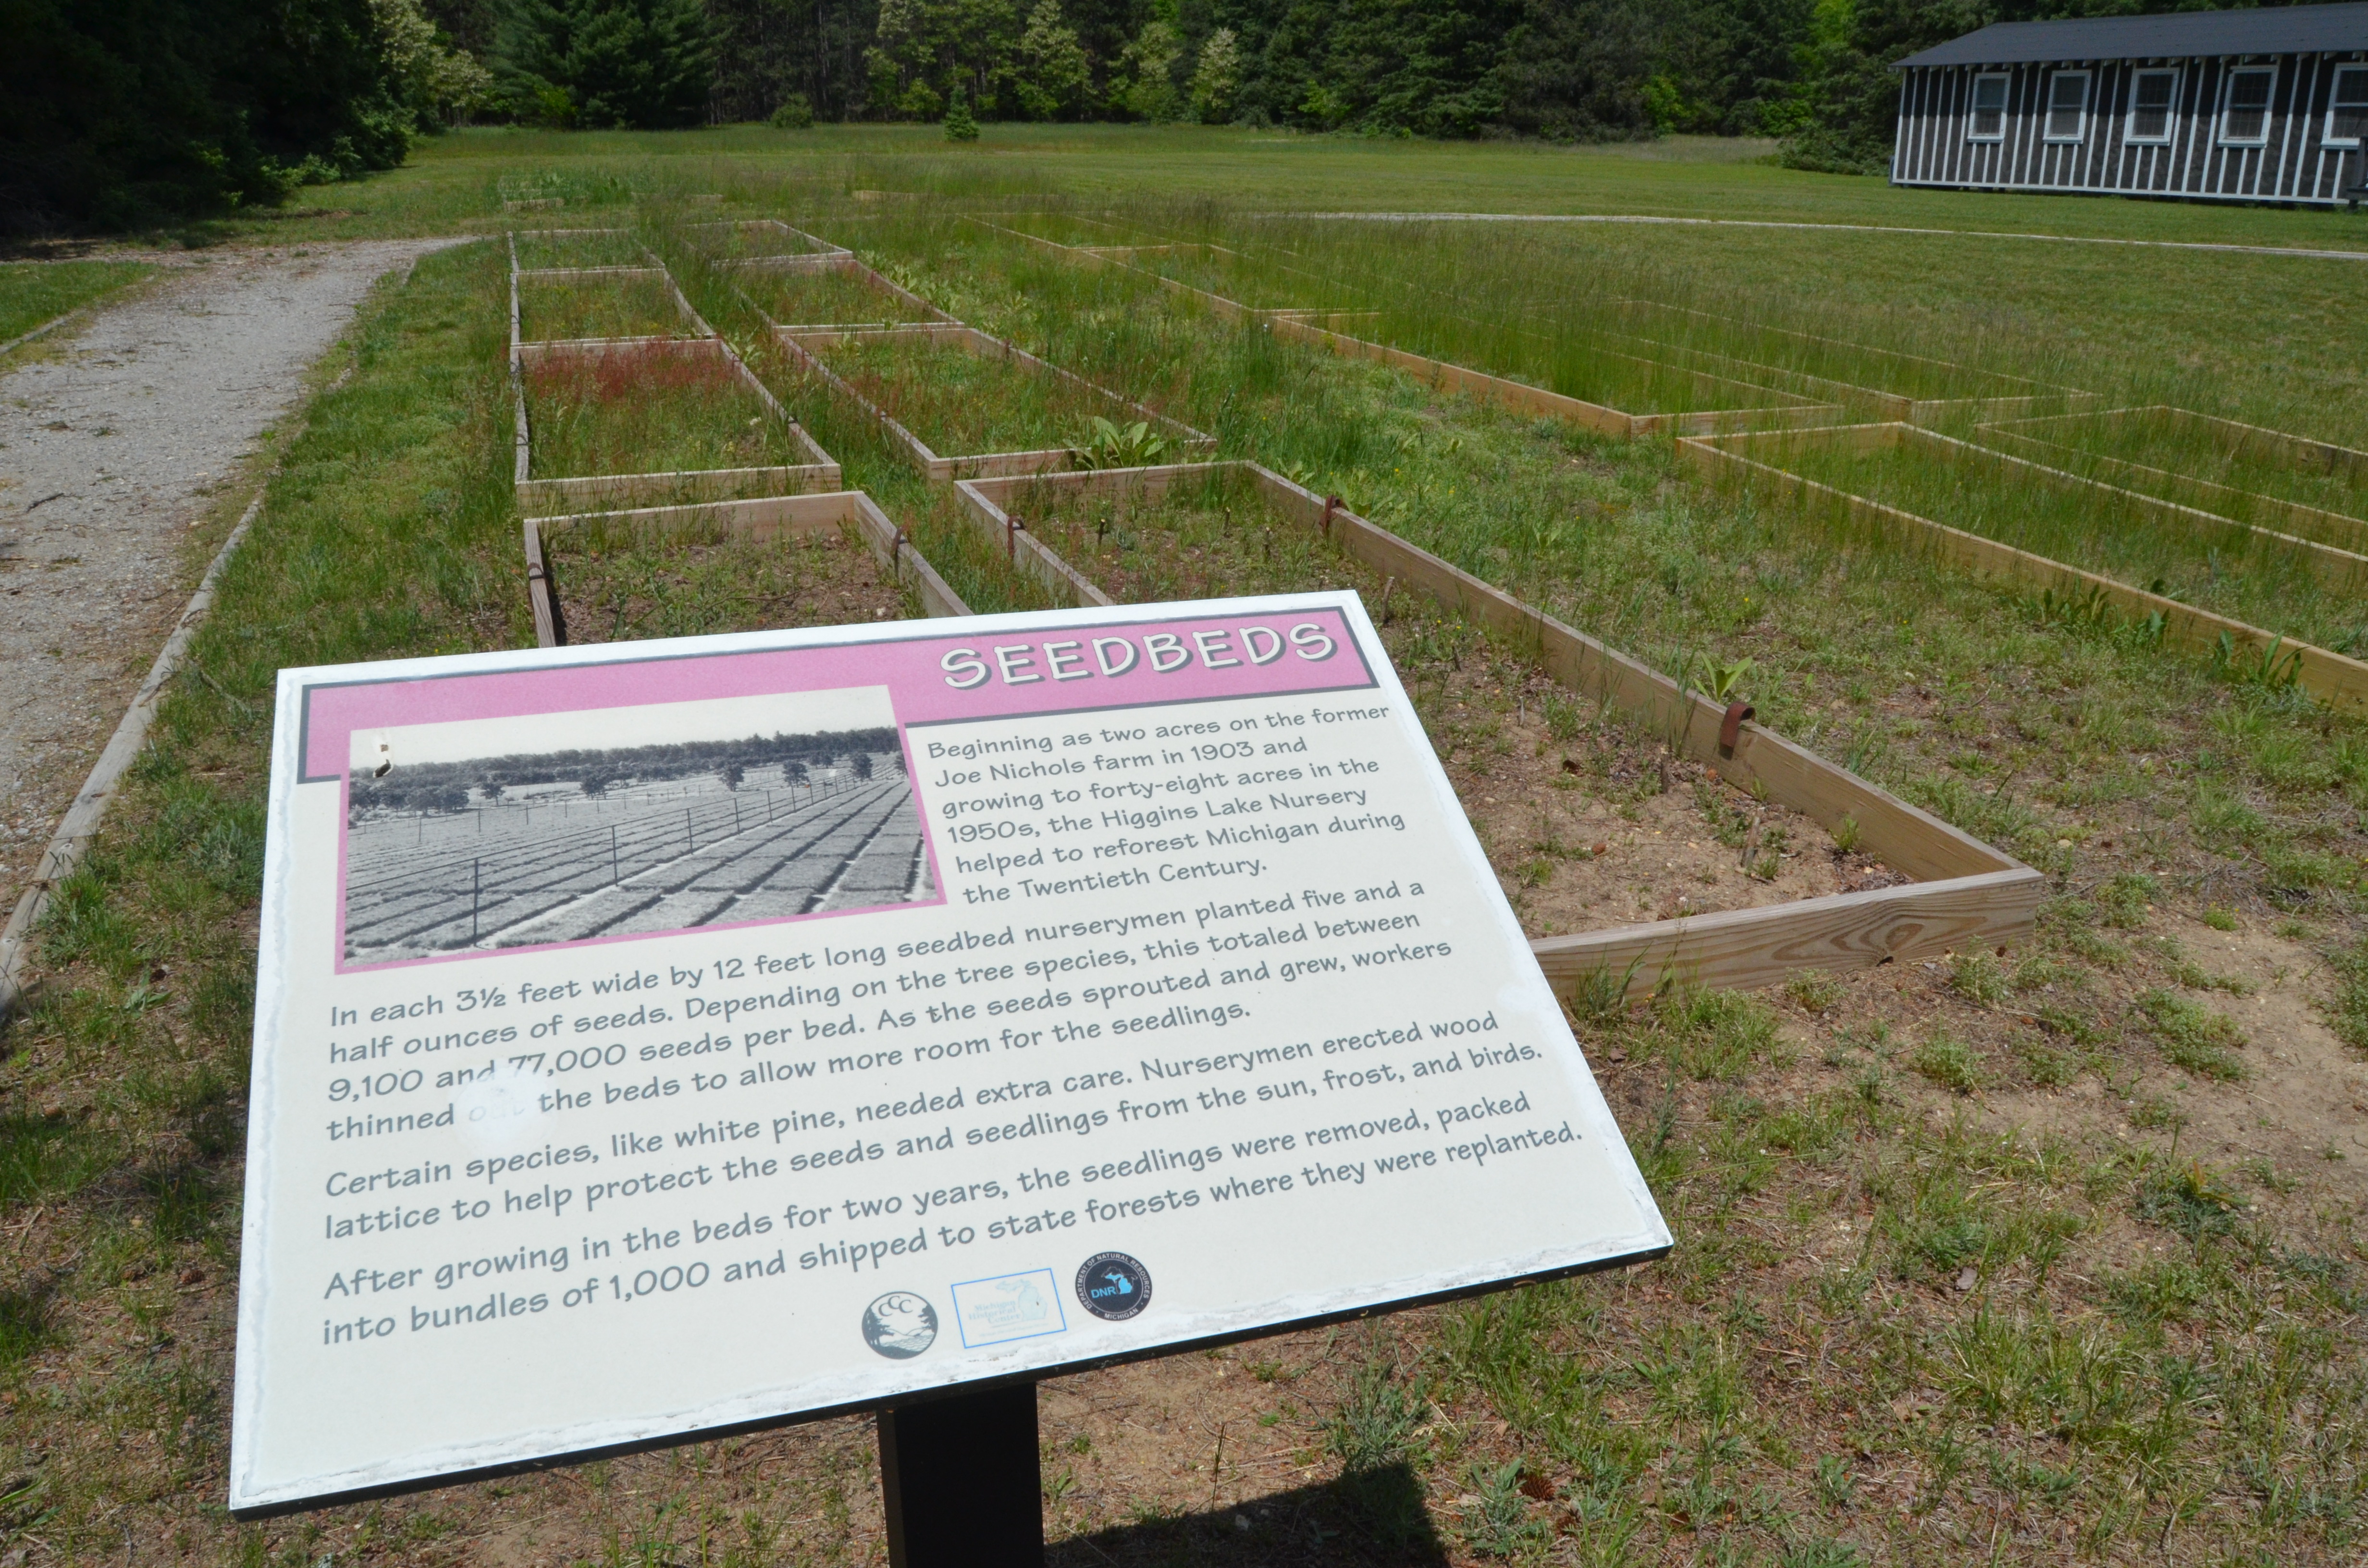 Michigan Civilian Conservation Corps Museum Seed Bed Garden